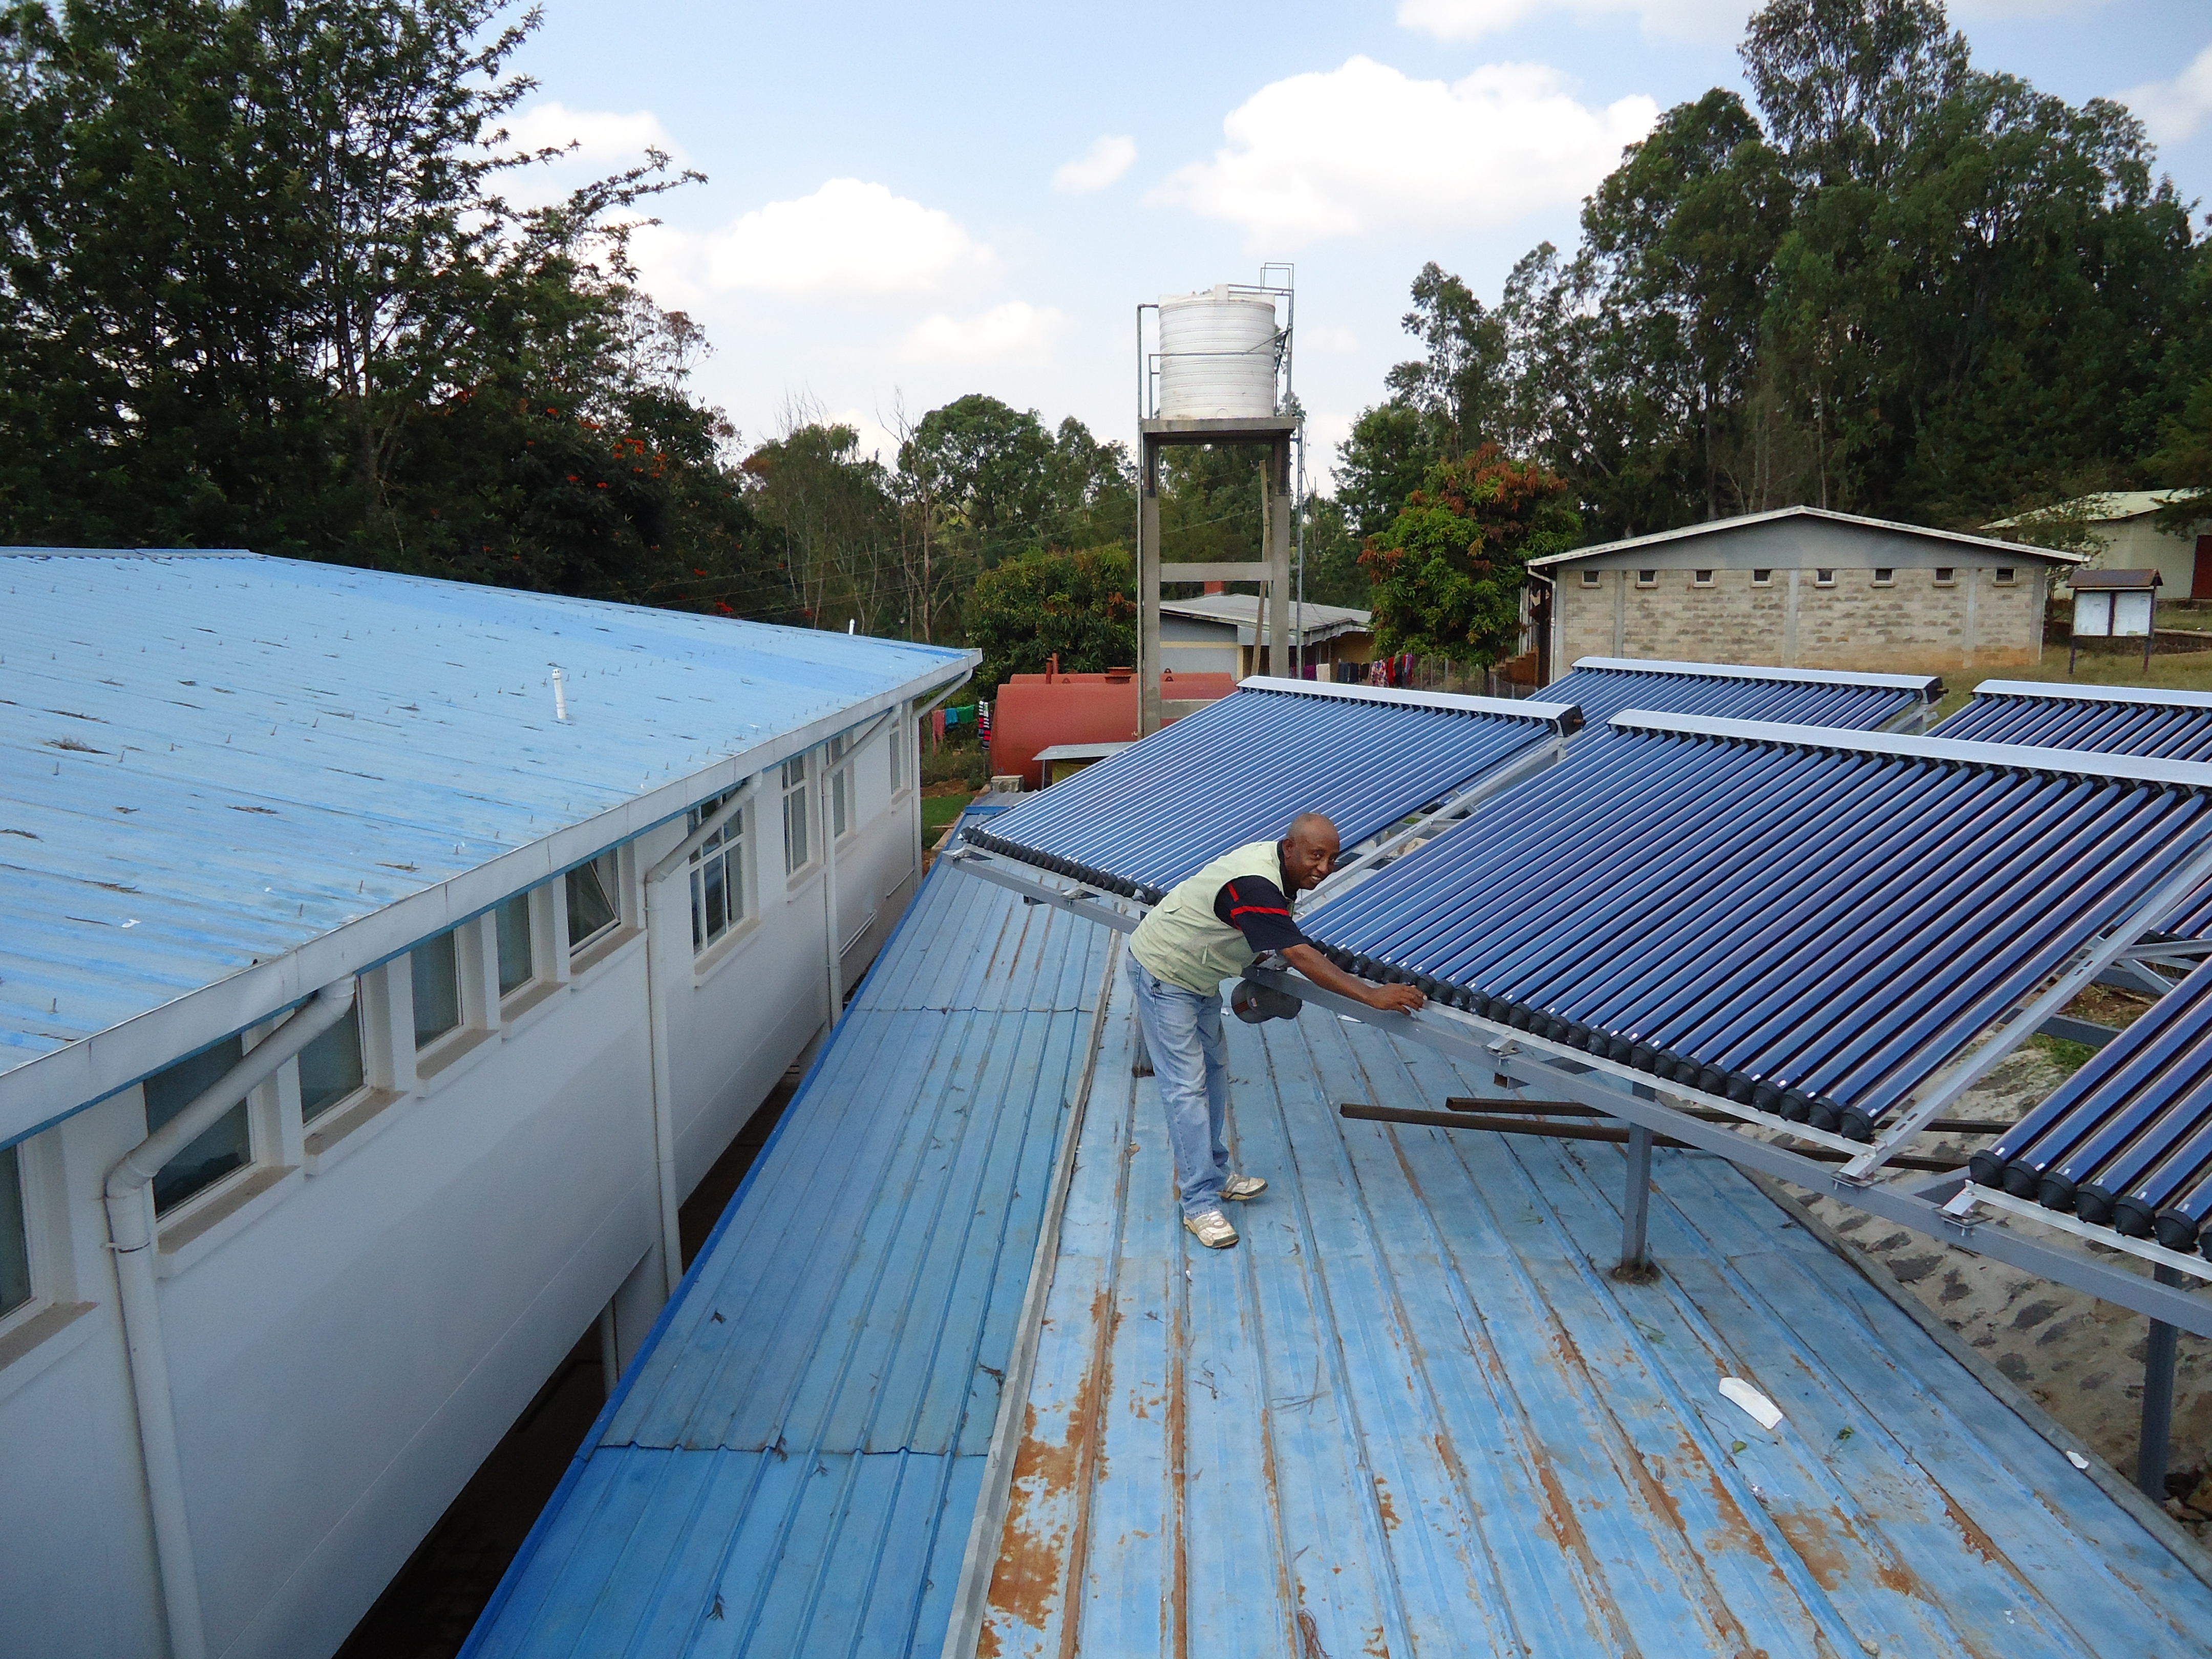  Commercial Solar Water Heating Projects